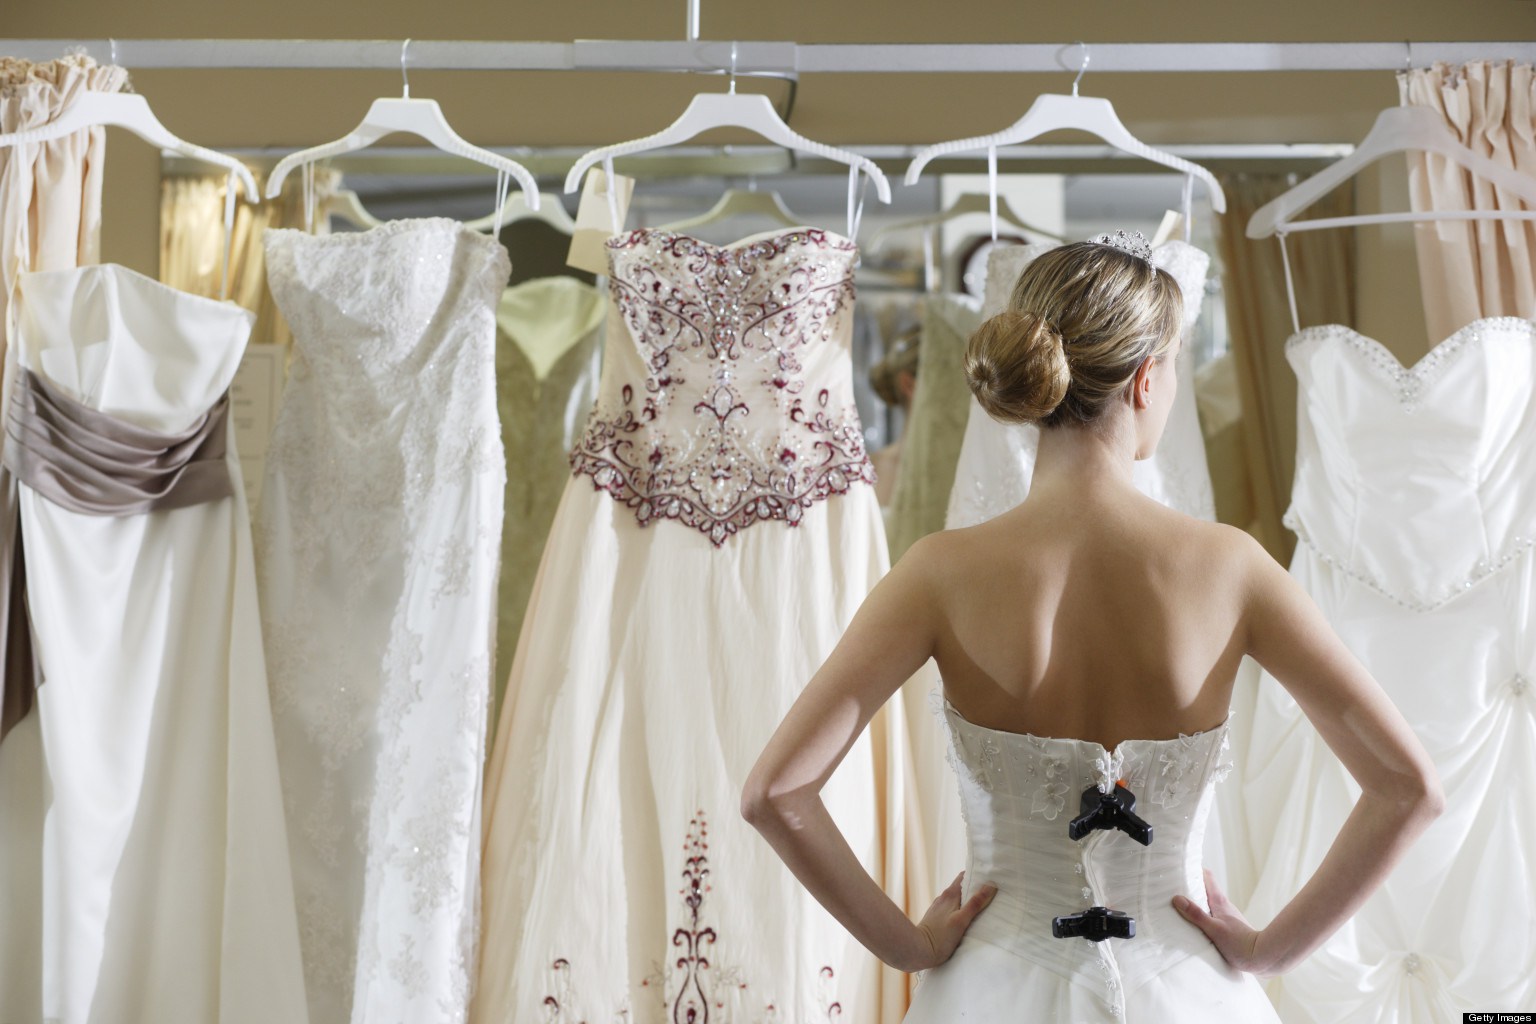 Choosing a PERFECT wedding dress. Types, styles and classification